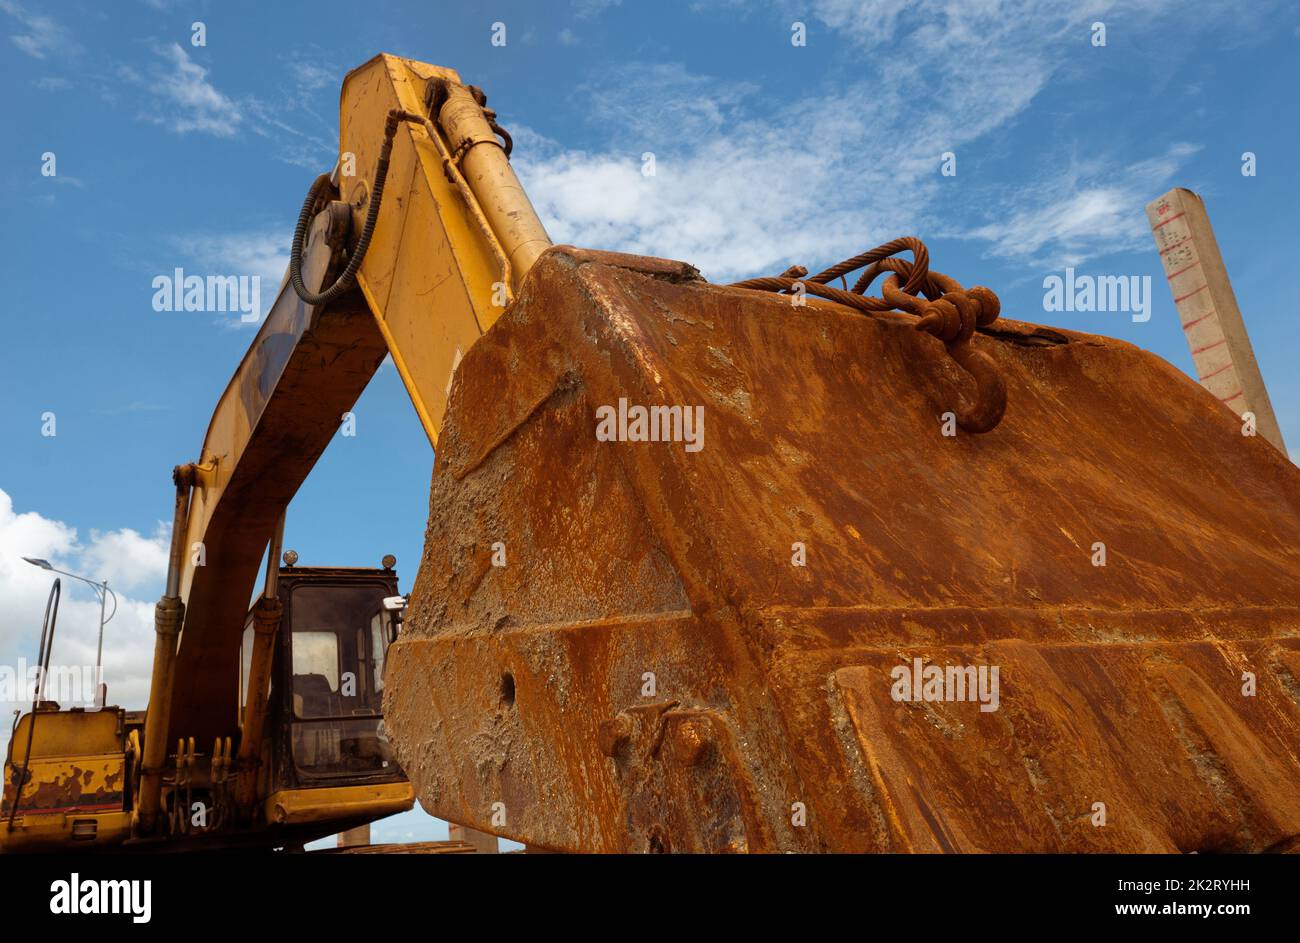 Closeup rusty metal bucket of old backhoe parked at construction site against blue sky. Excavating machine. Earth moving machine. Excavation vehicle. Dirt bucket of old digger. Construction industry. Stock Photo